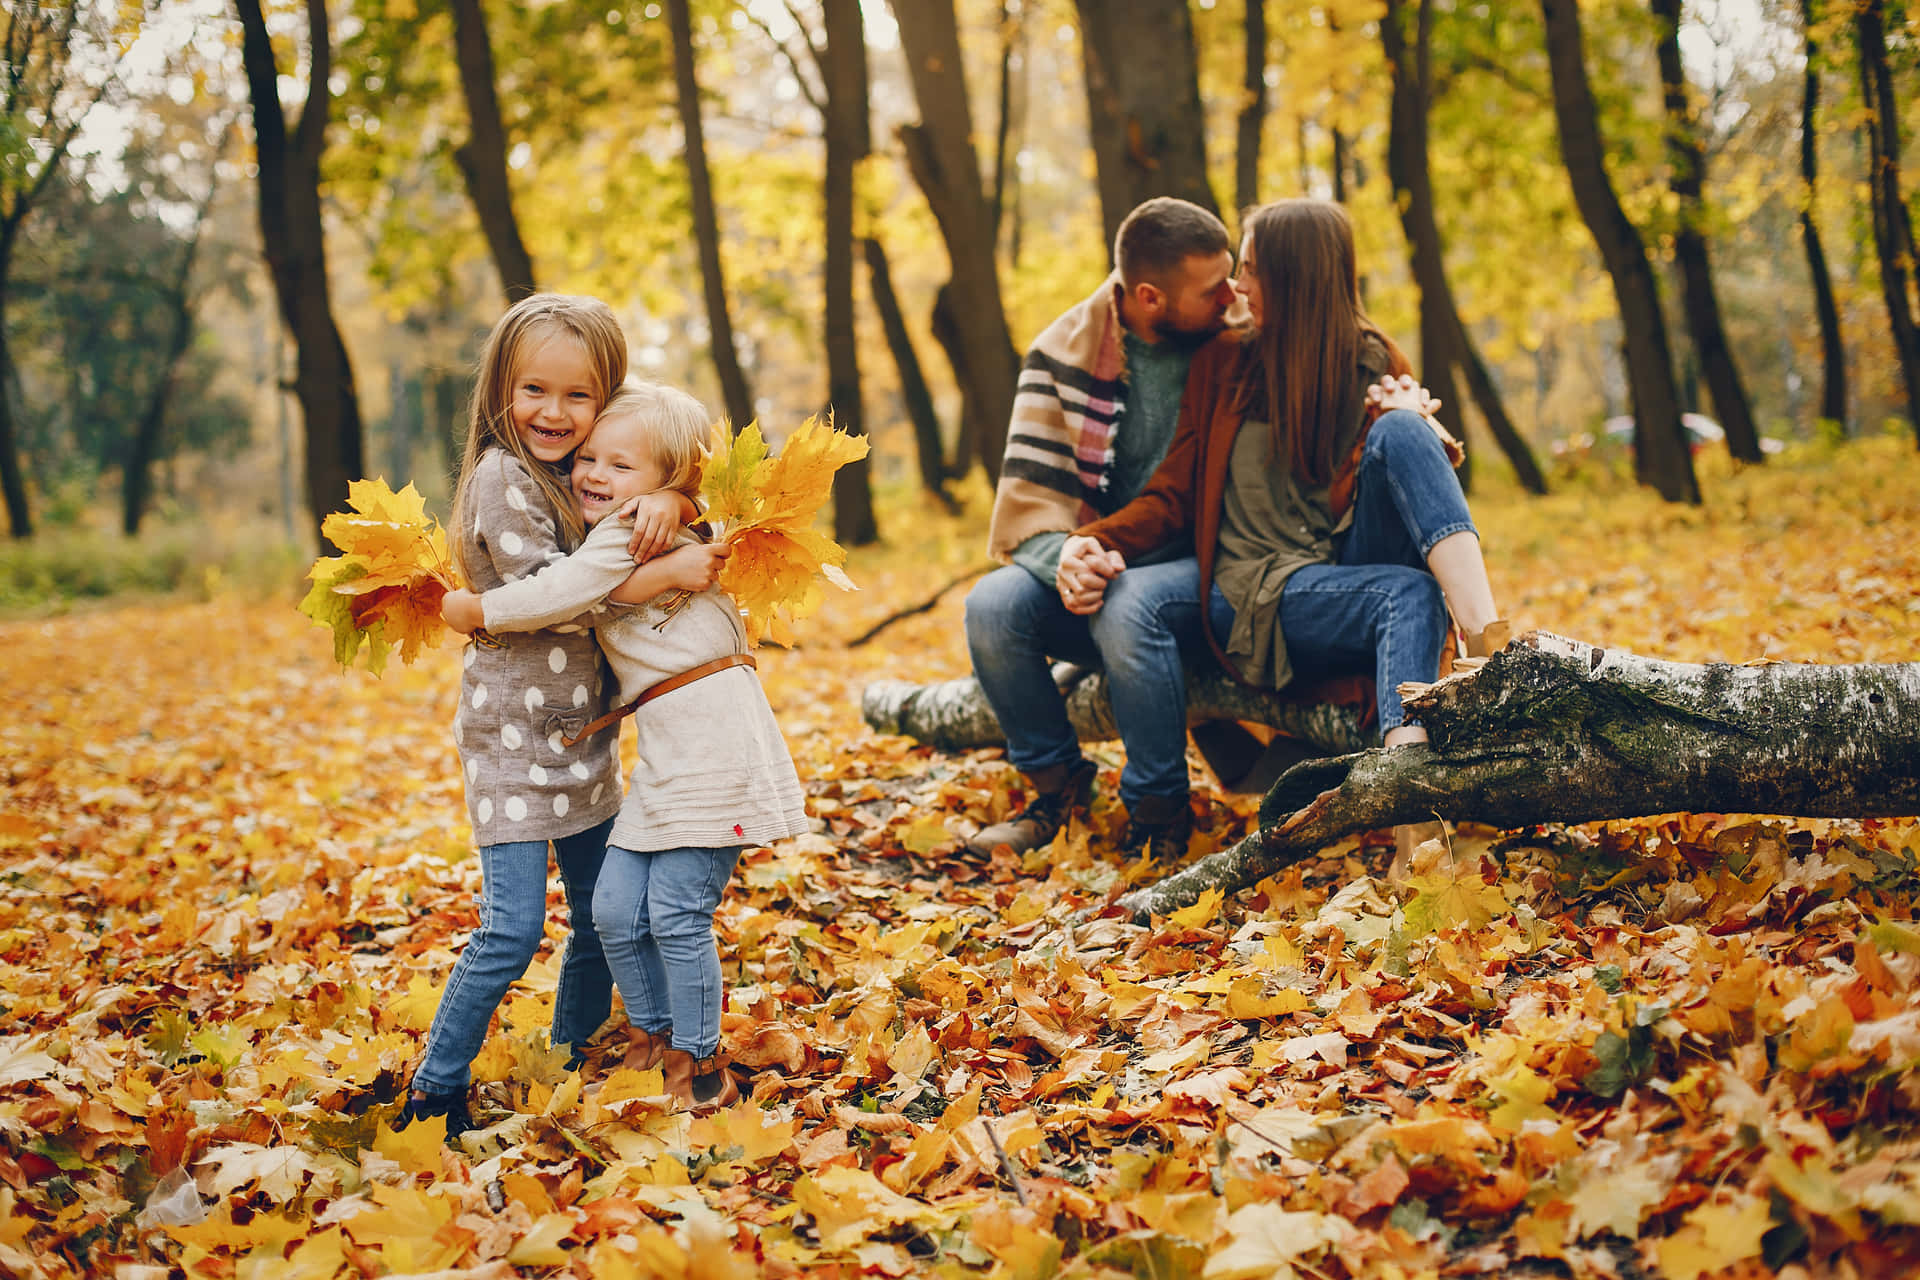 "Fall Family Time is the Best Time!"